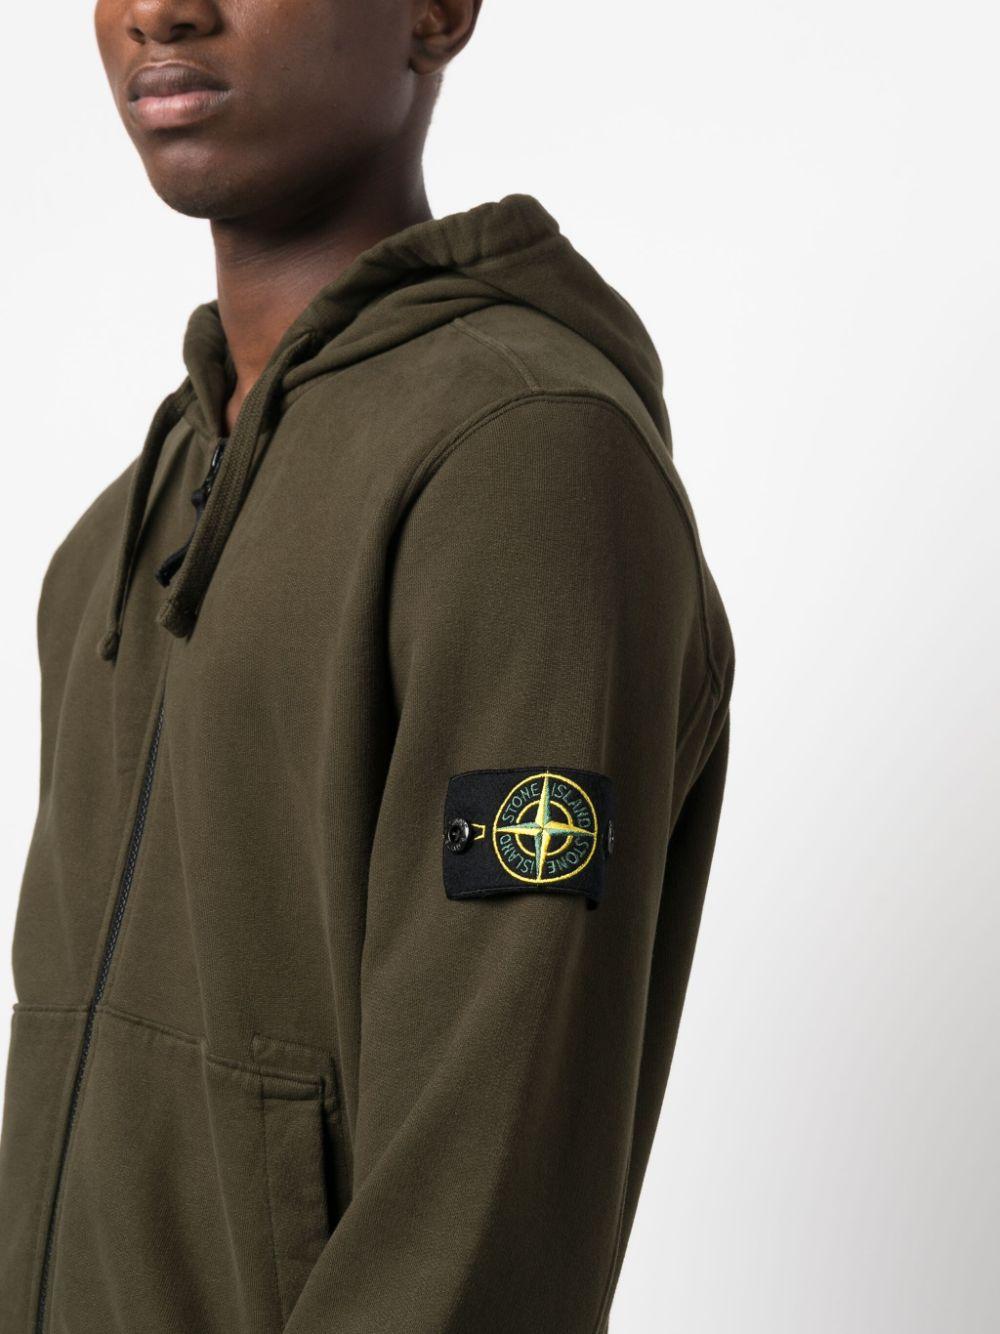 Stone Island Logo Cotton Hoodie in Green for Men | Lyst